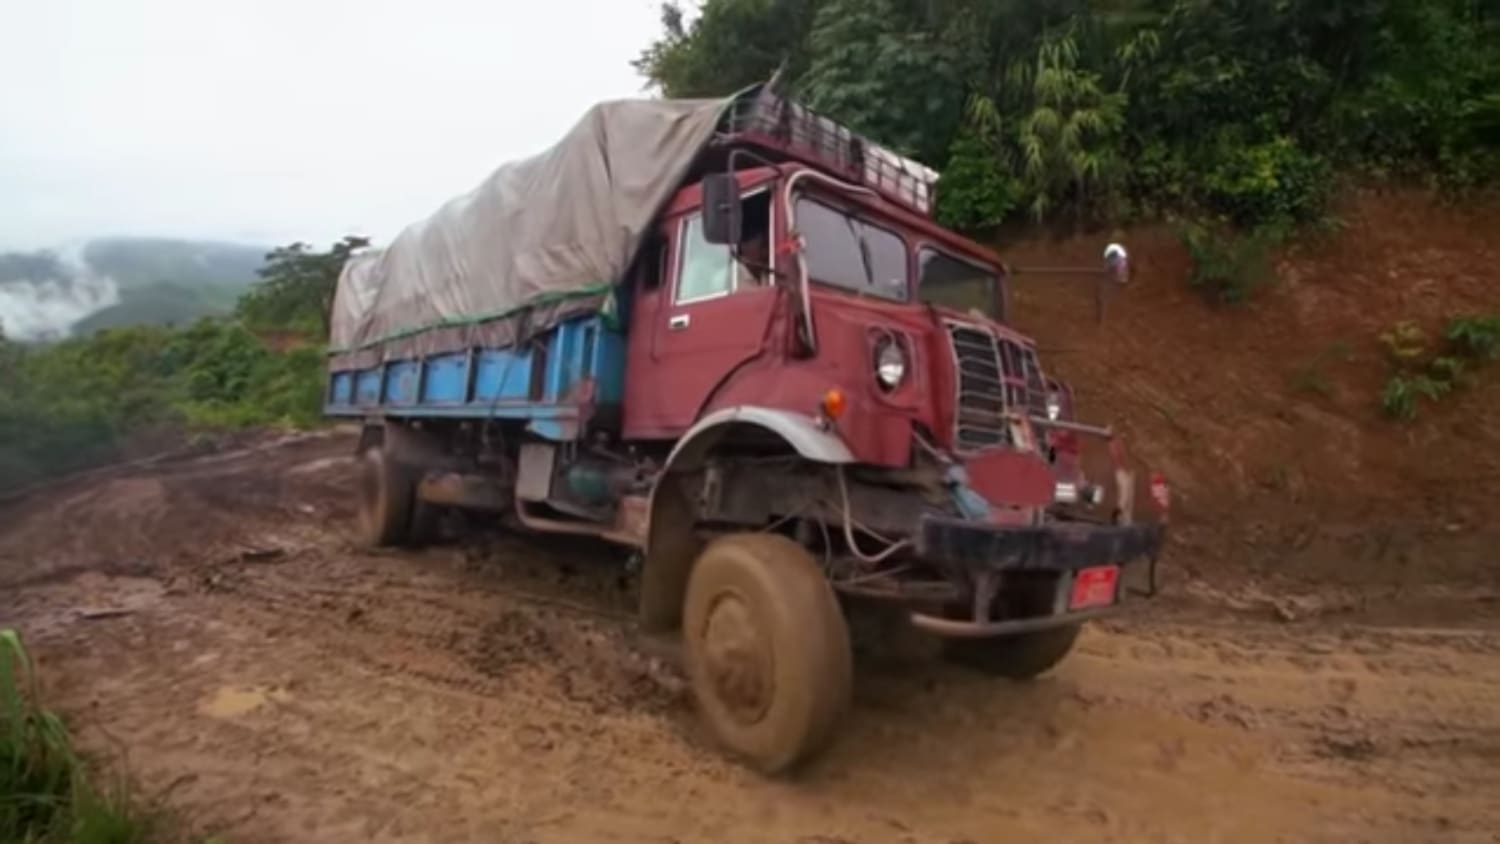 Burmese GMC-based "Frankenstein" with new engine, brakes, steering and some home-made solutions to go